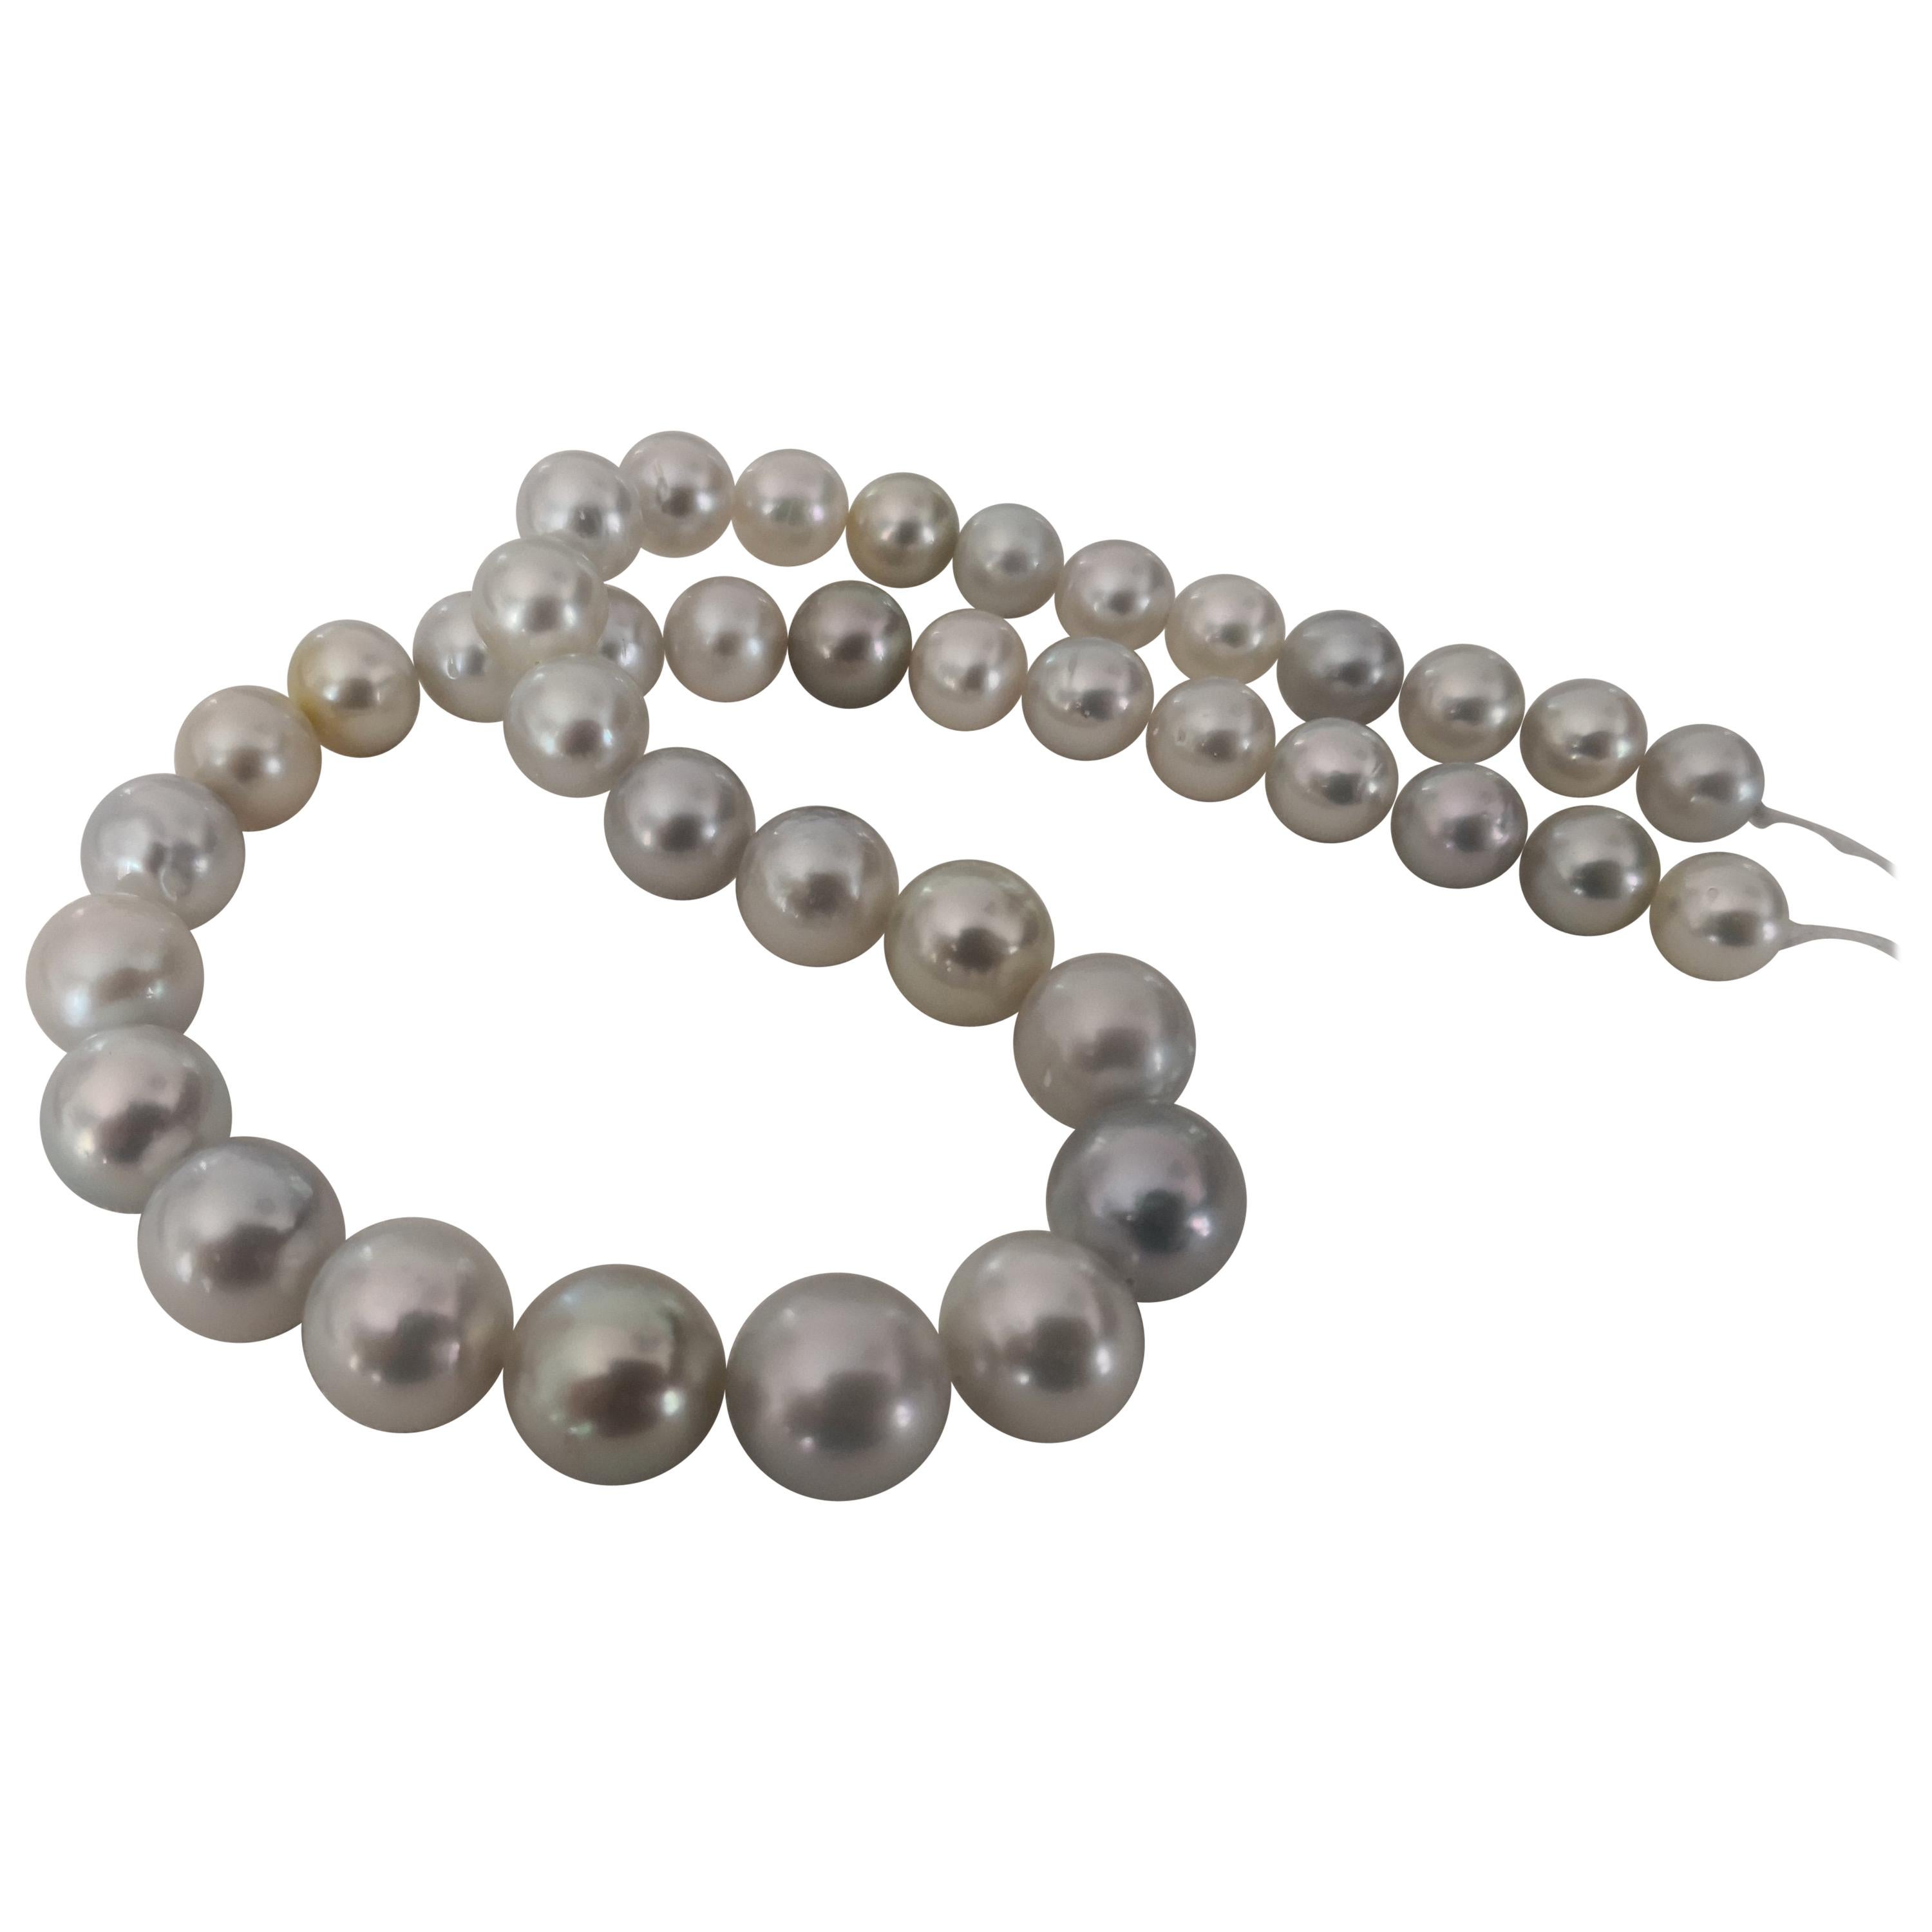 Elegante Silver Natural Color South Sea Pearls with High Luster and Orient